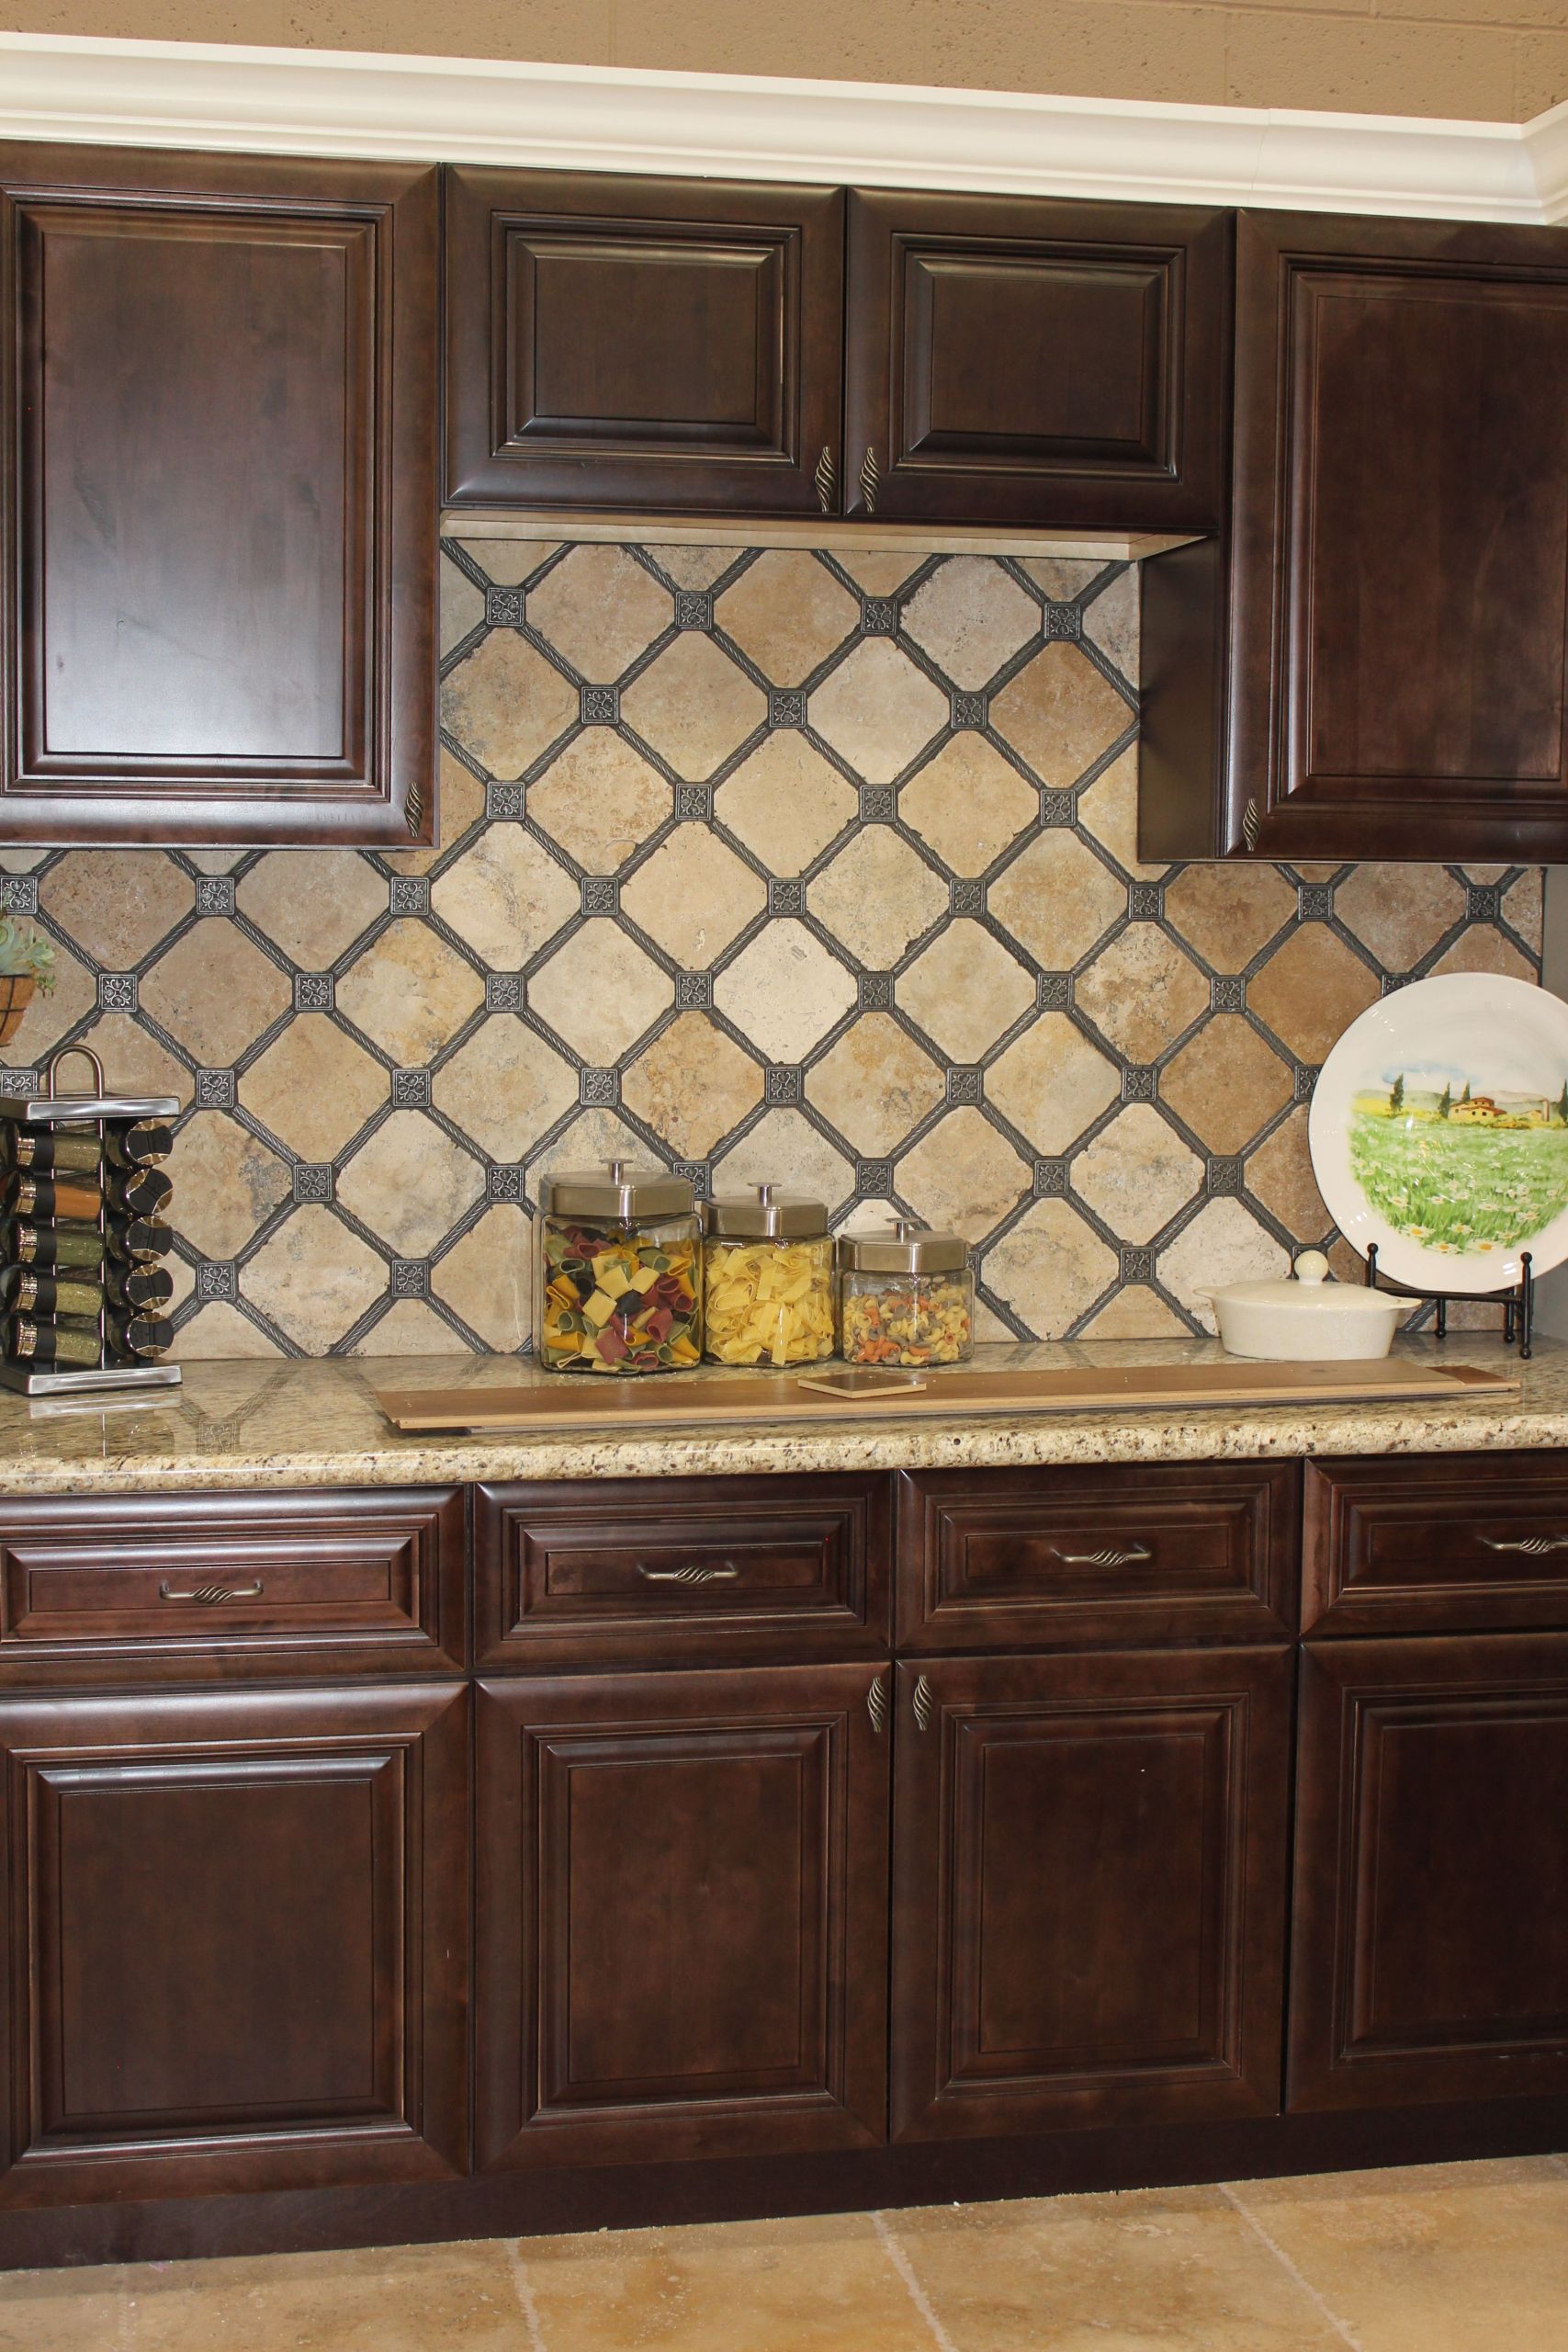 Floor And Decor Kitchen Backsplash
 Take your kitchen from dull to beautiful with the natural